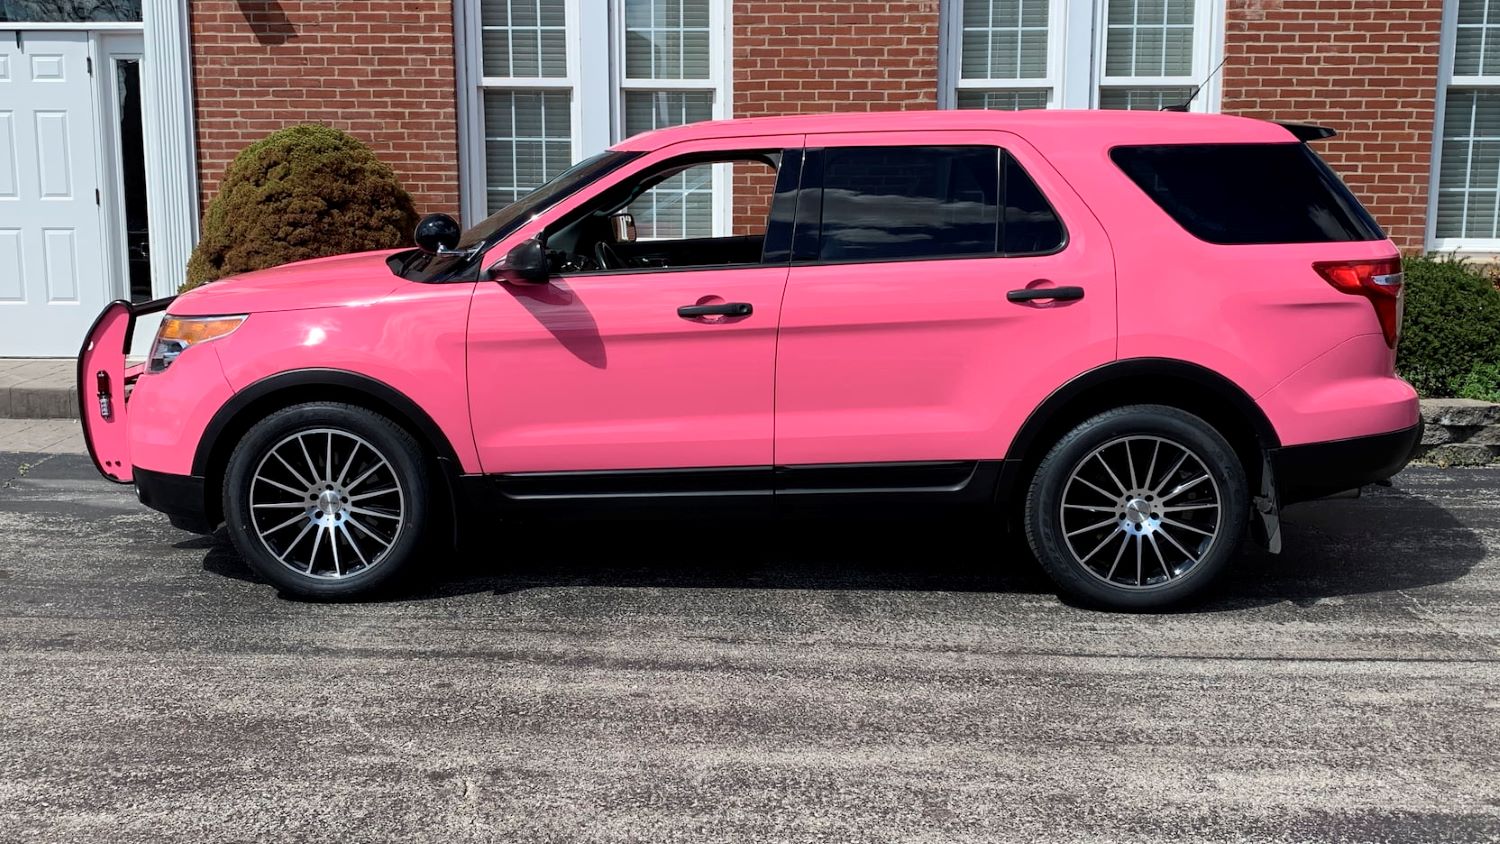 Incredibly Pink 2013 Ford Explorer Police Interceptor Heads To Auction